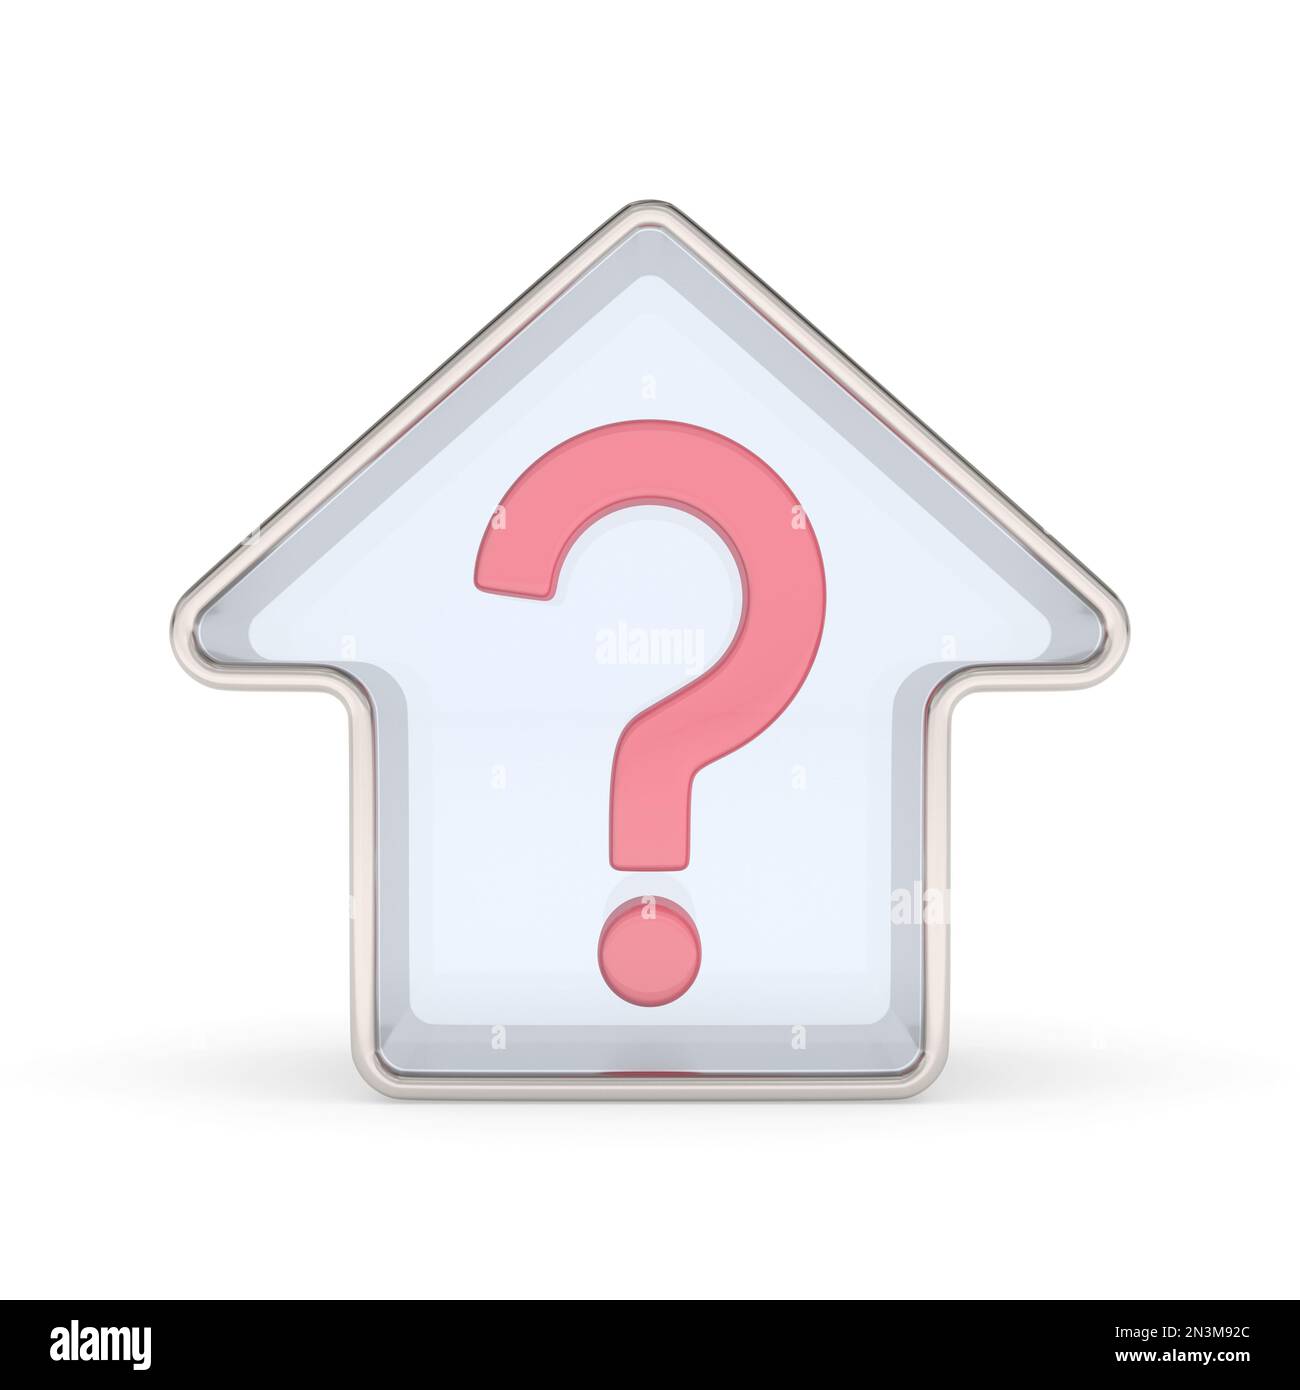 question into glass house on white background. Isolated 3d illustration Stock Photo